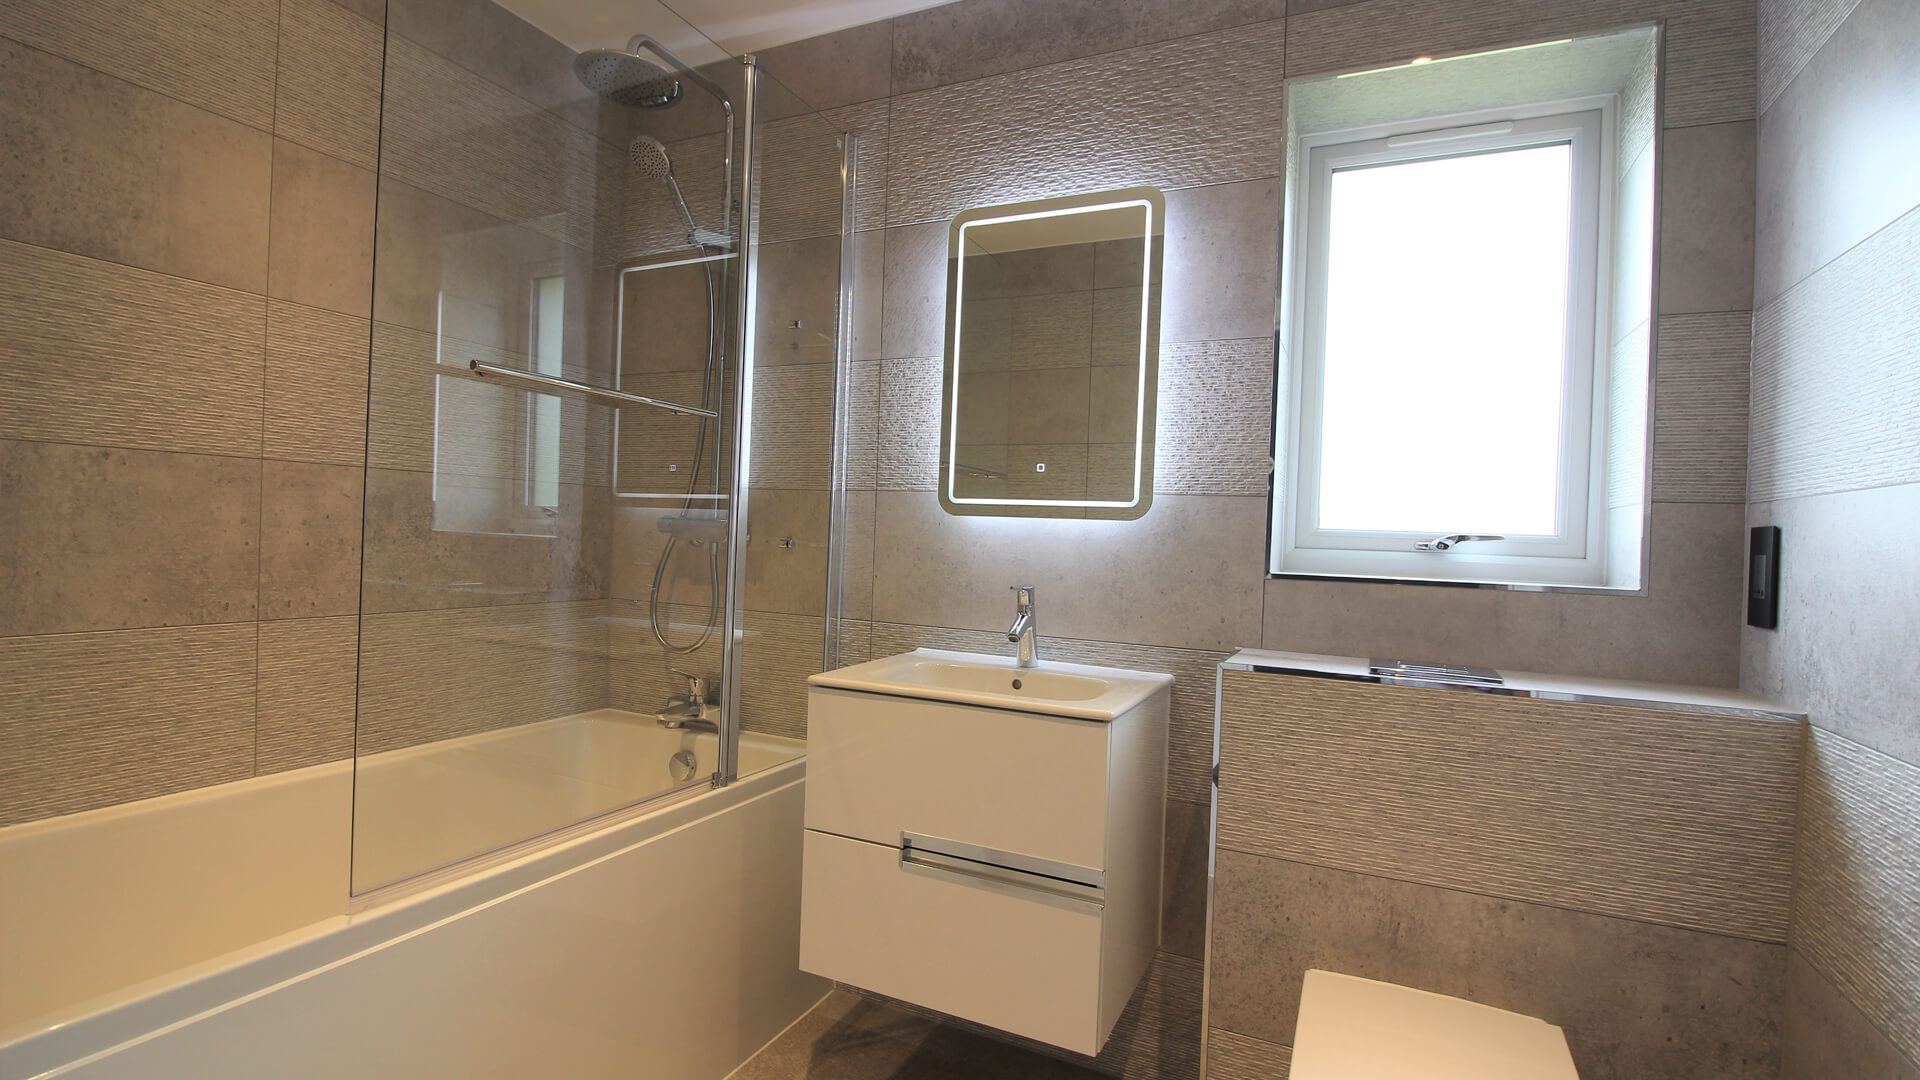 Fitted bathroom at Woodside court.